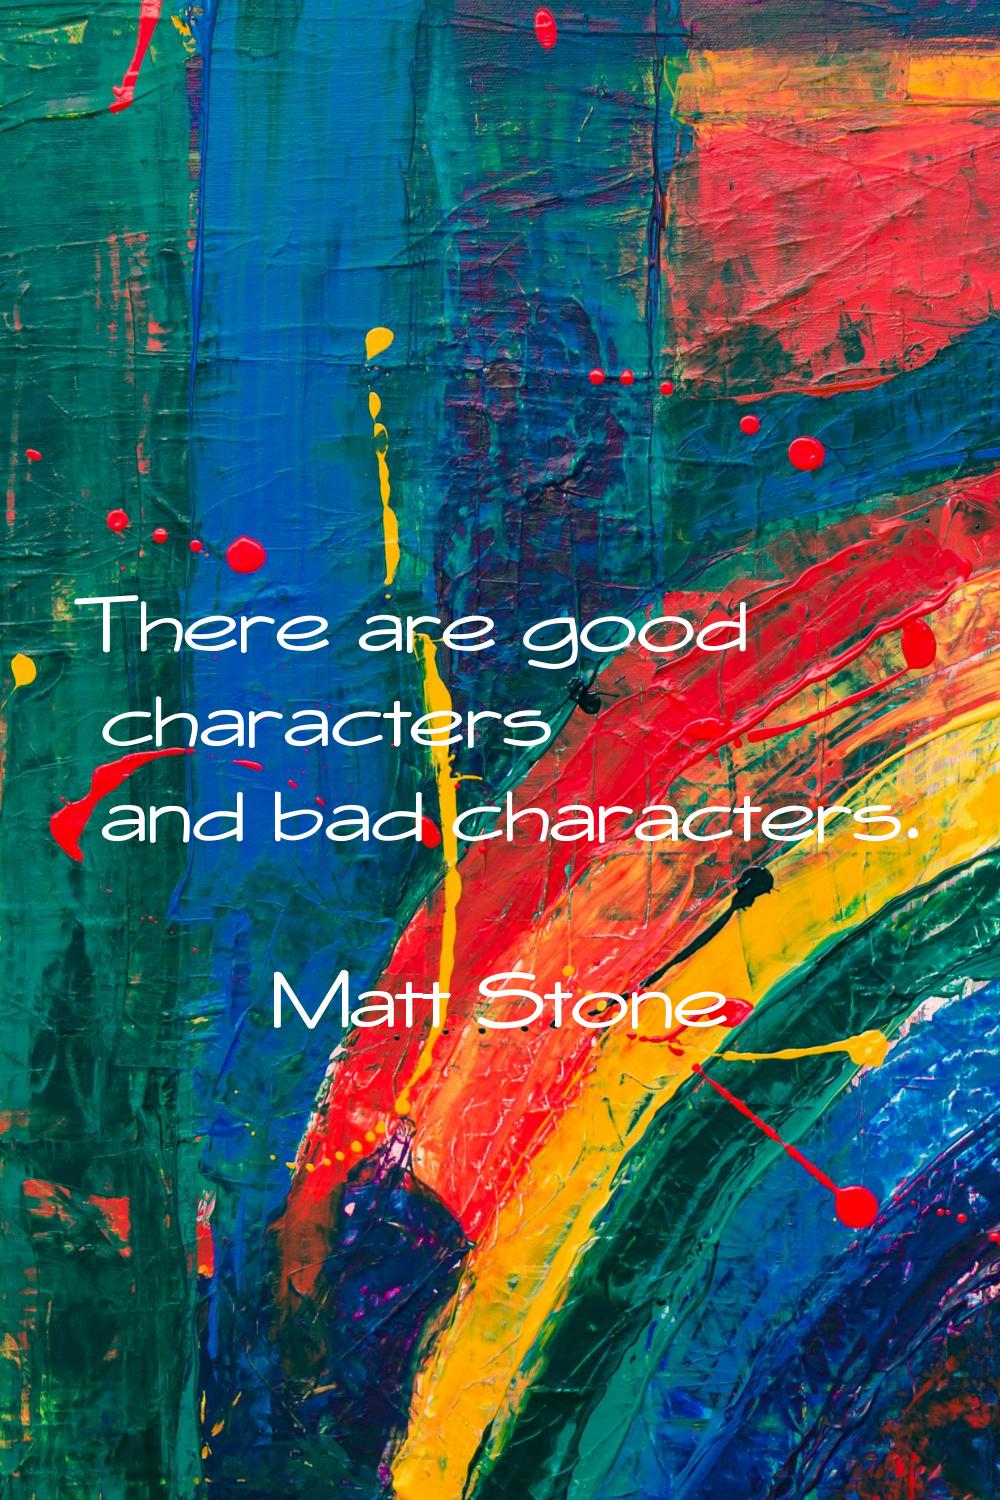 There are good characters and bad characters.